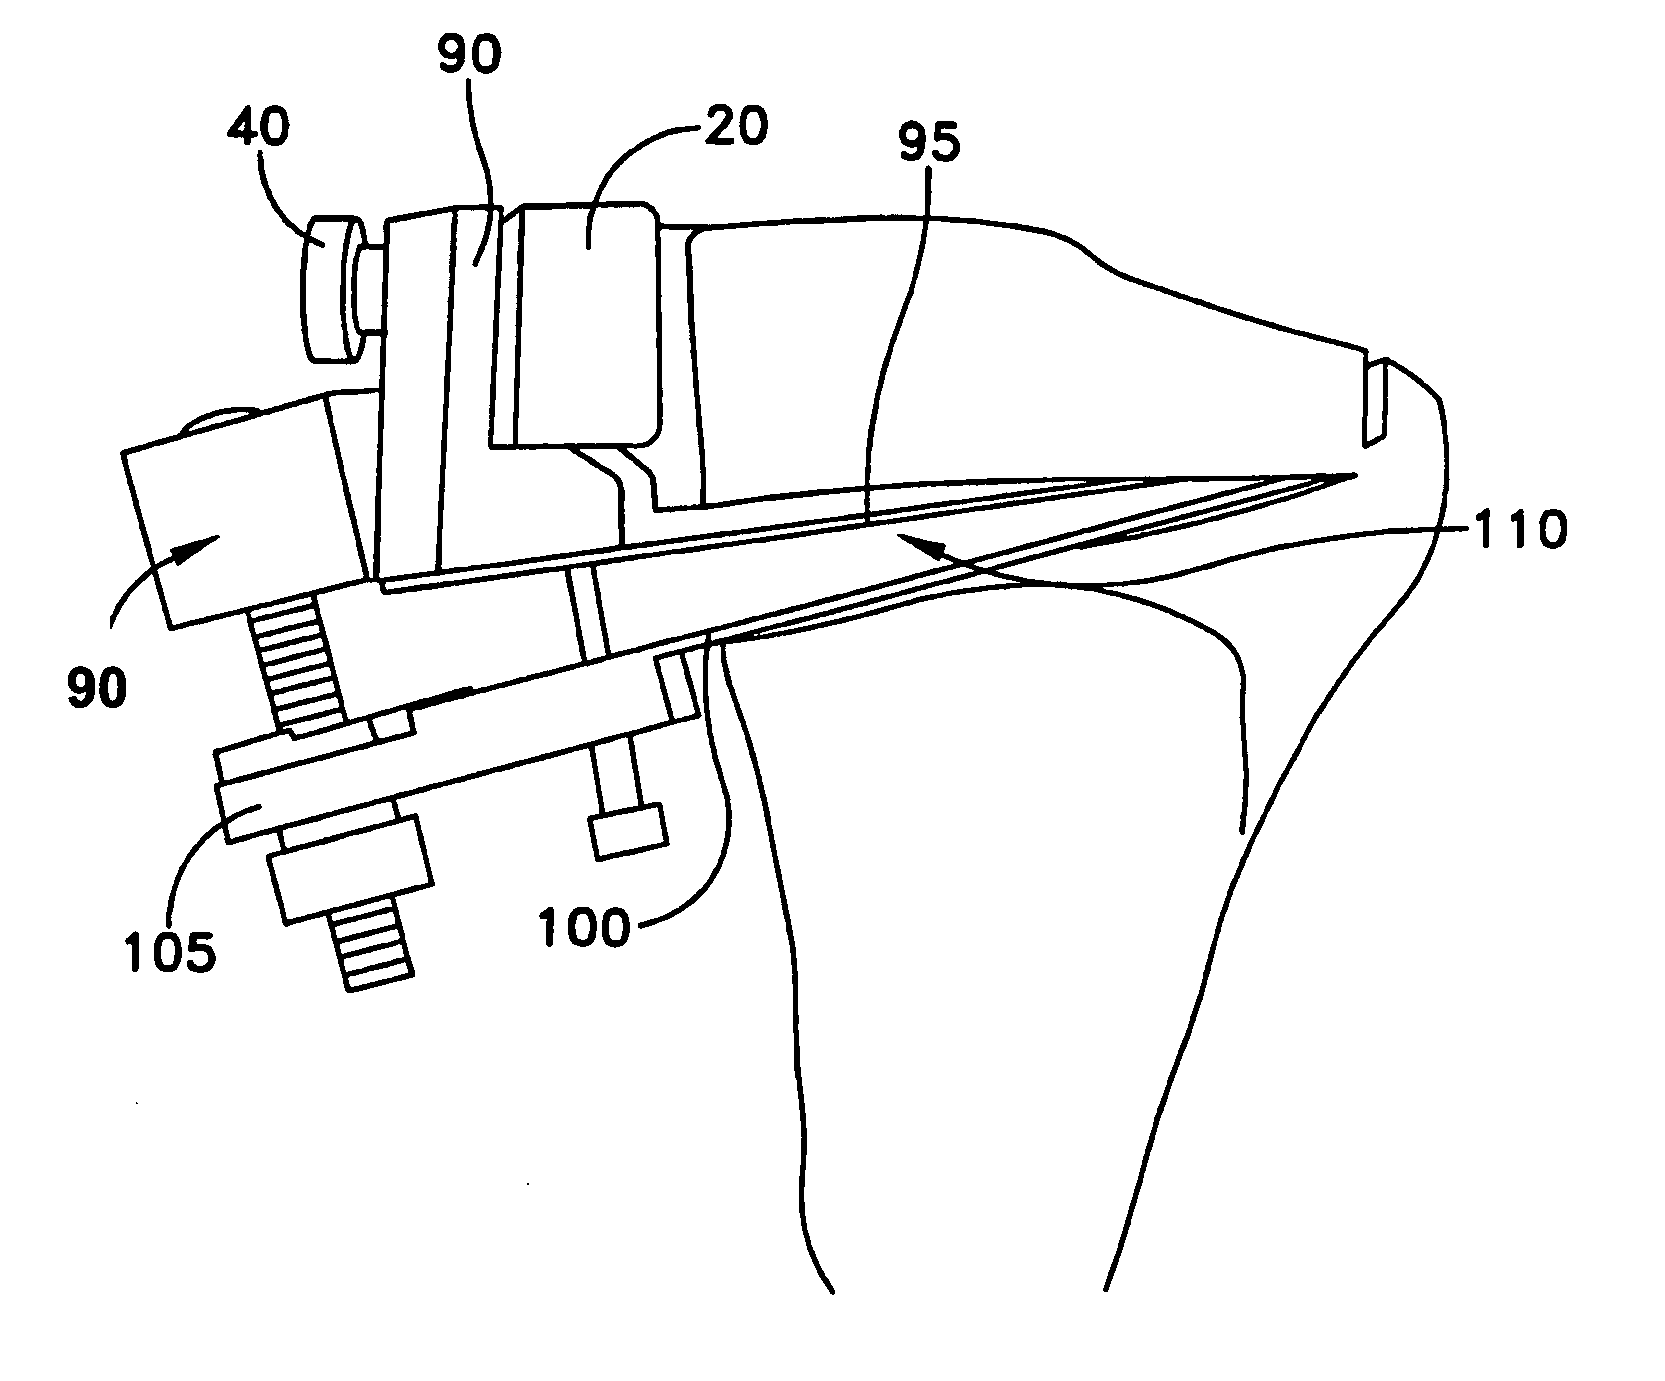 Open wedge osteotomy system and surgical method